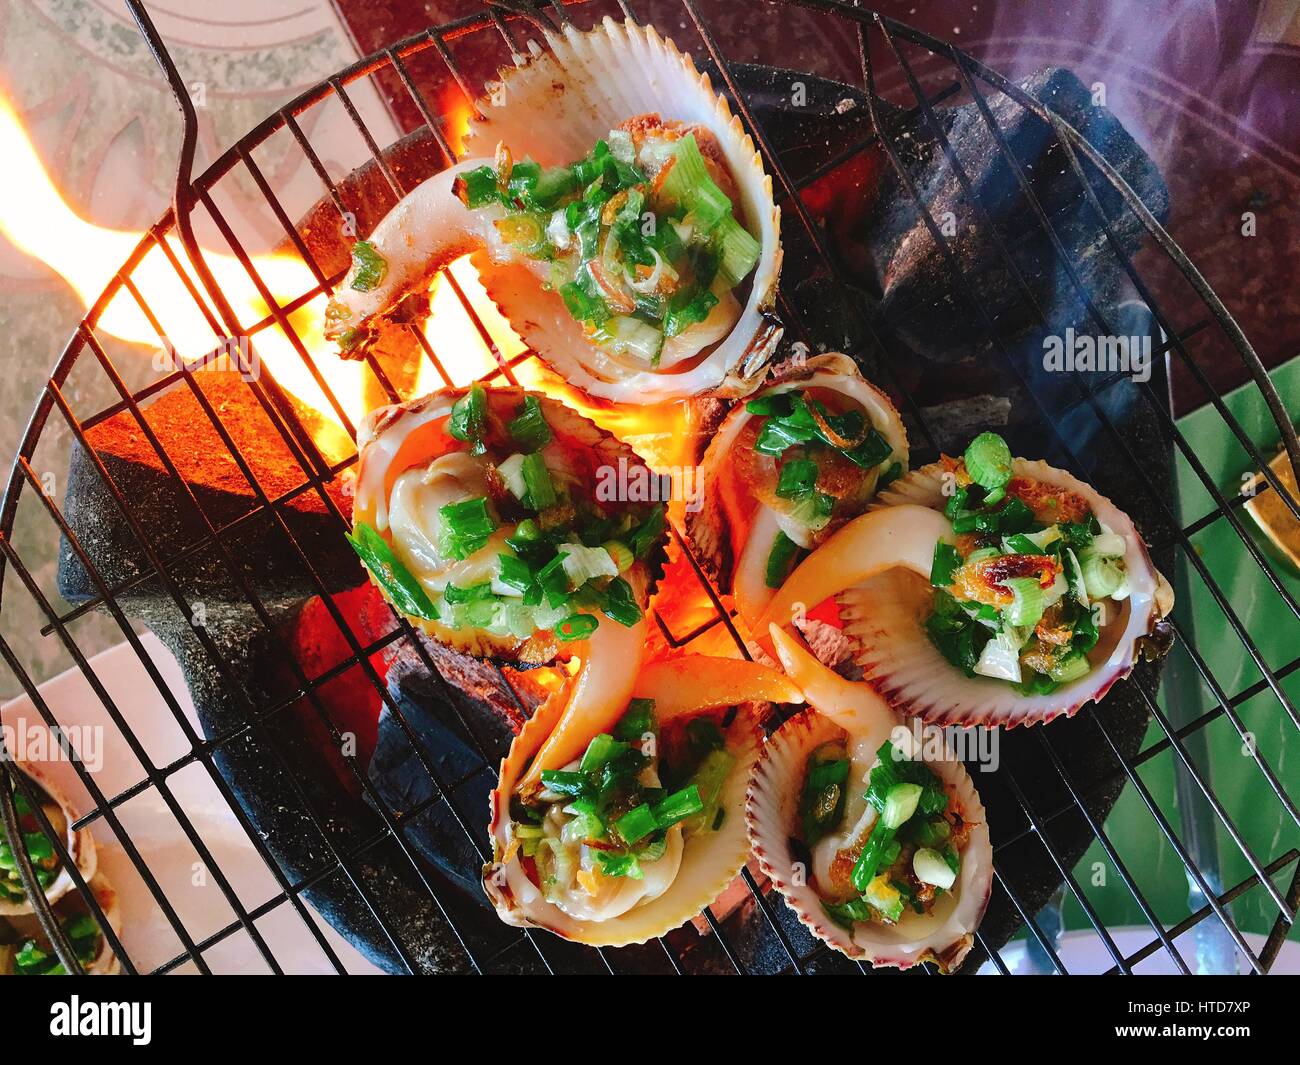 Delicious shell or clams mussels on hot fire coal grill Stock Photo